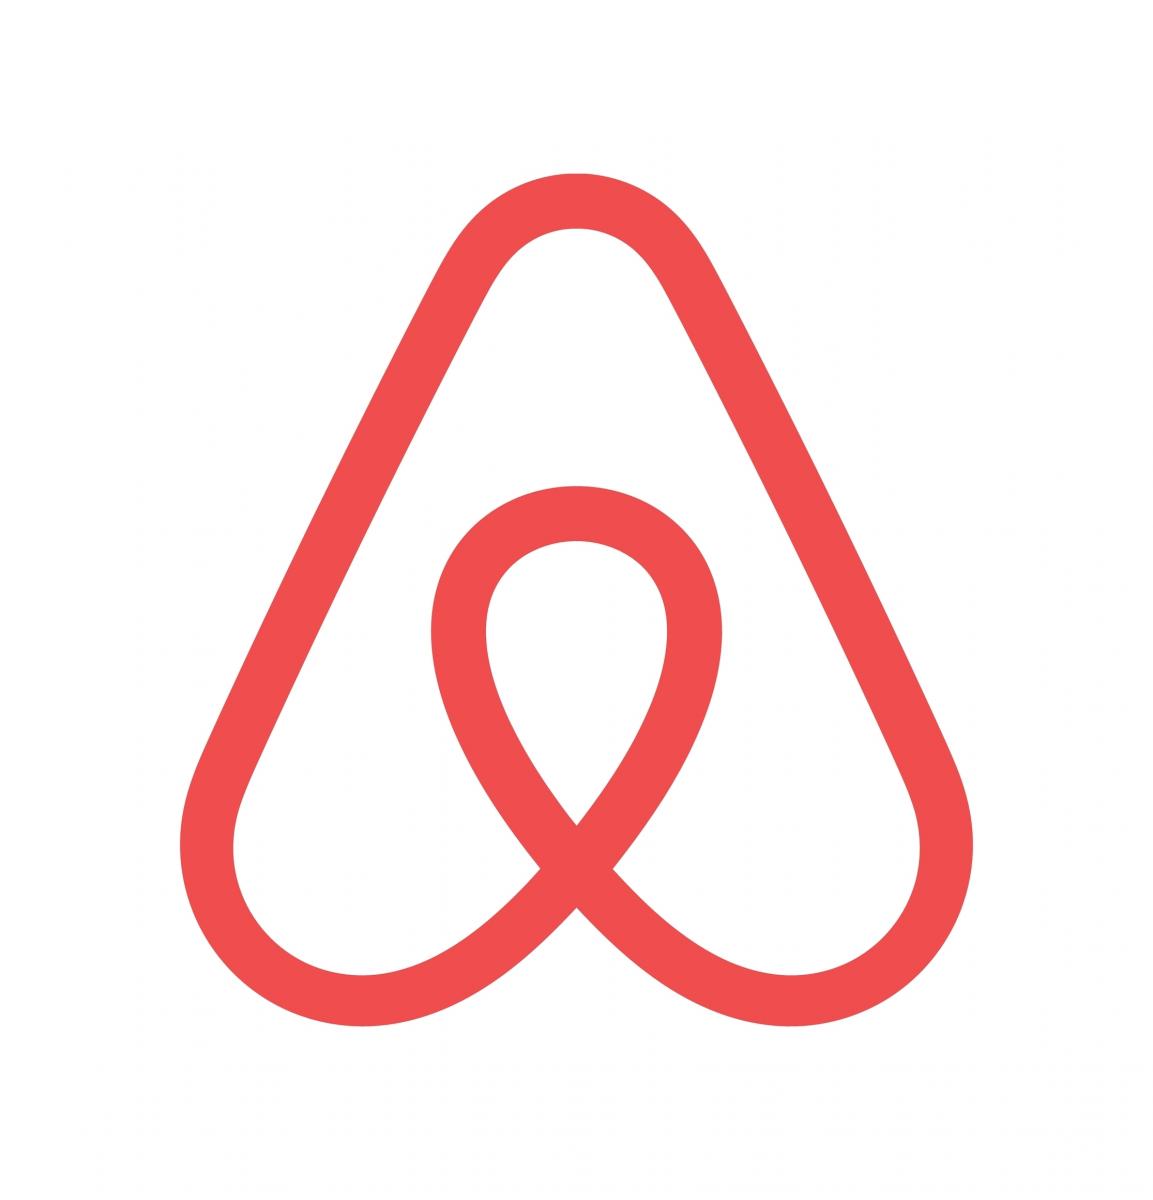 Airbnb cash gift for hosts welcoming Eurovision guests